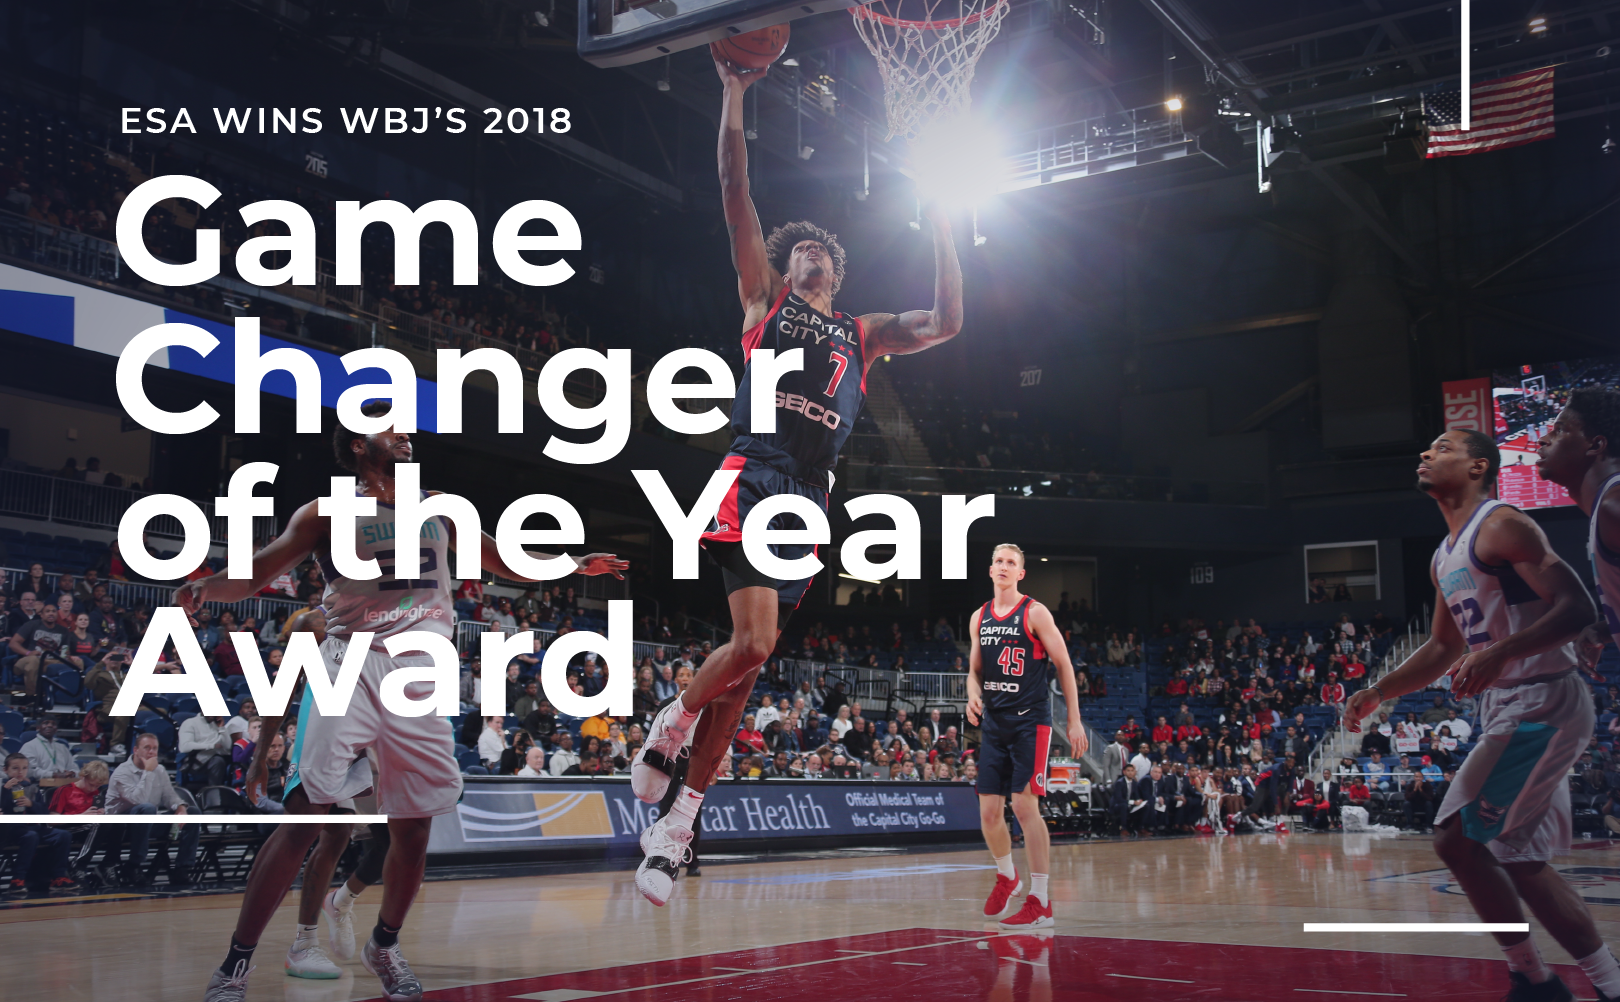 ESA Wins WBJ’s 2018 Game Changer of the Year Award